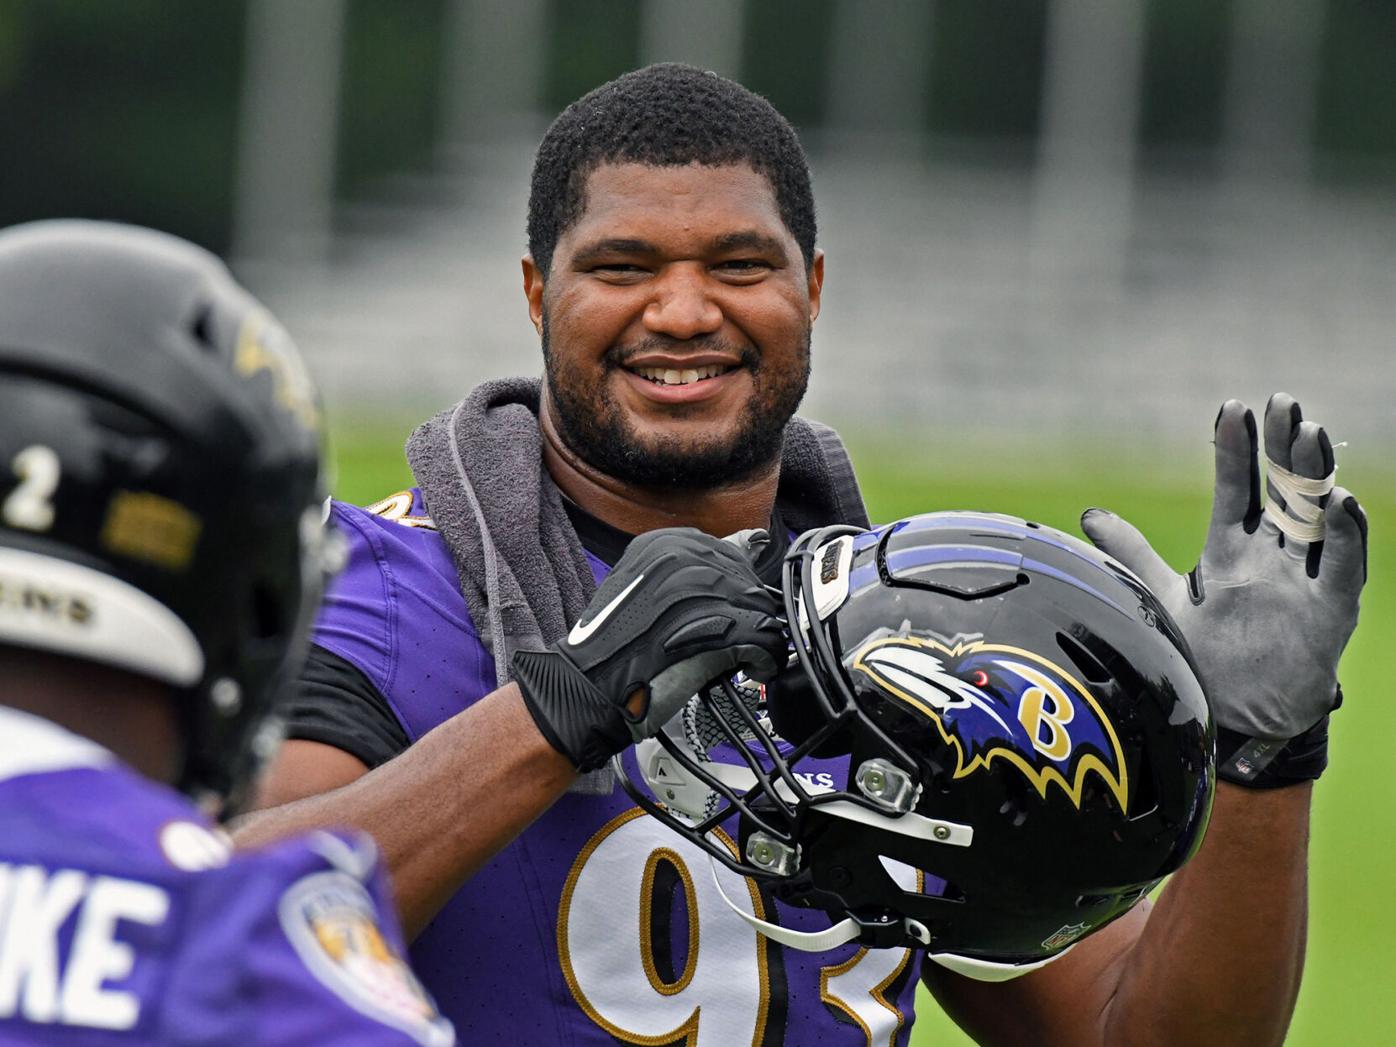 Ravens' Calais Campbell is one of a kind, National Sports